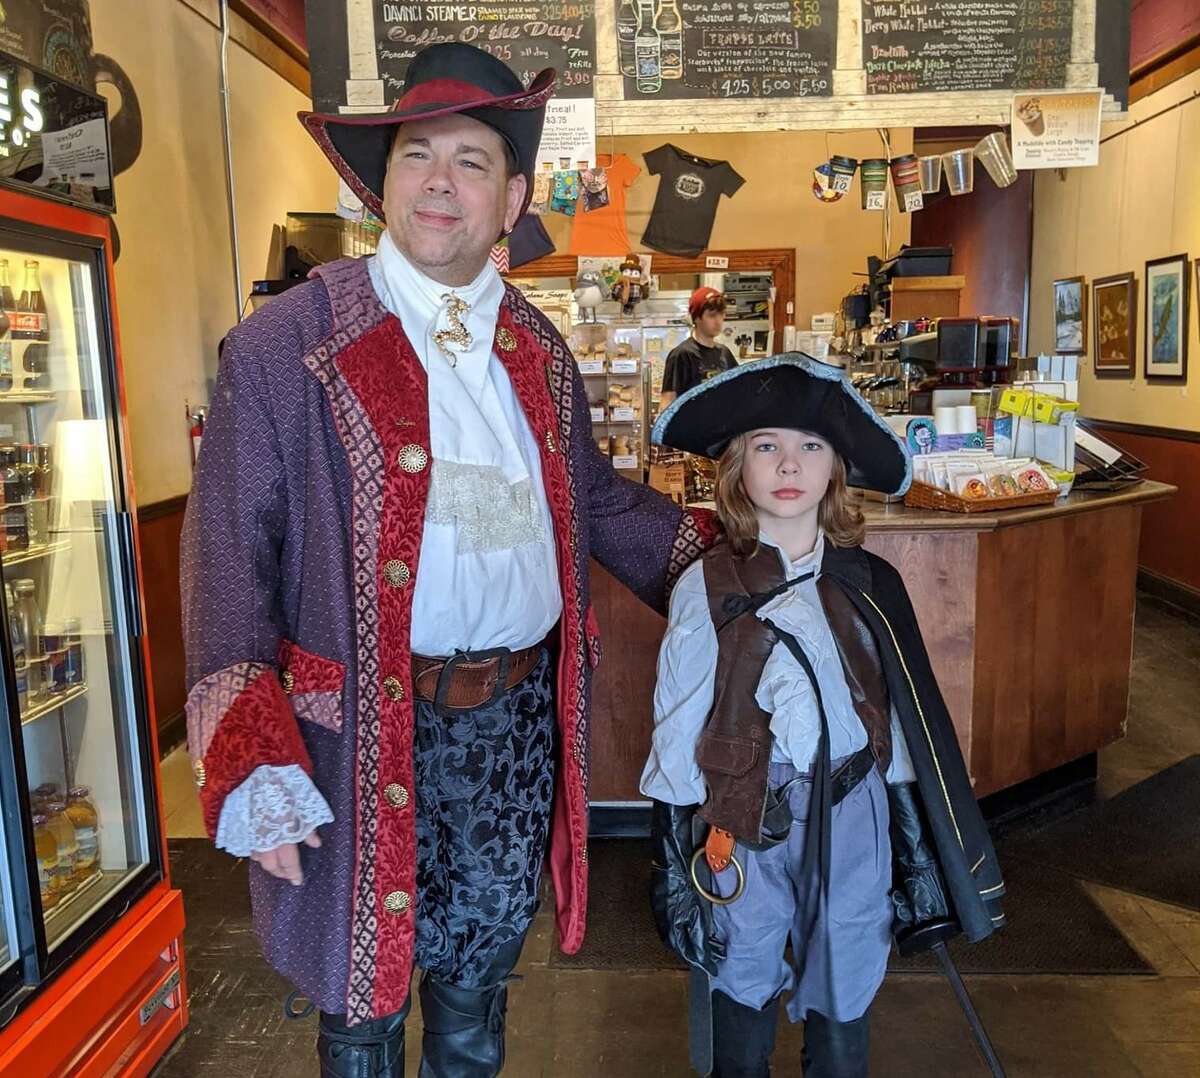 Huckleberry Finn Marshall, right, pictured here with his father, Richard Marshall, enjoys dressing as a pirate and attending Renaissance Fairs with his parents. These costumes were displayed a couple of years ago.